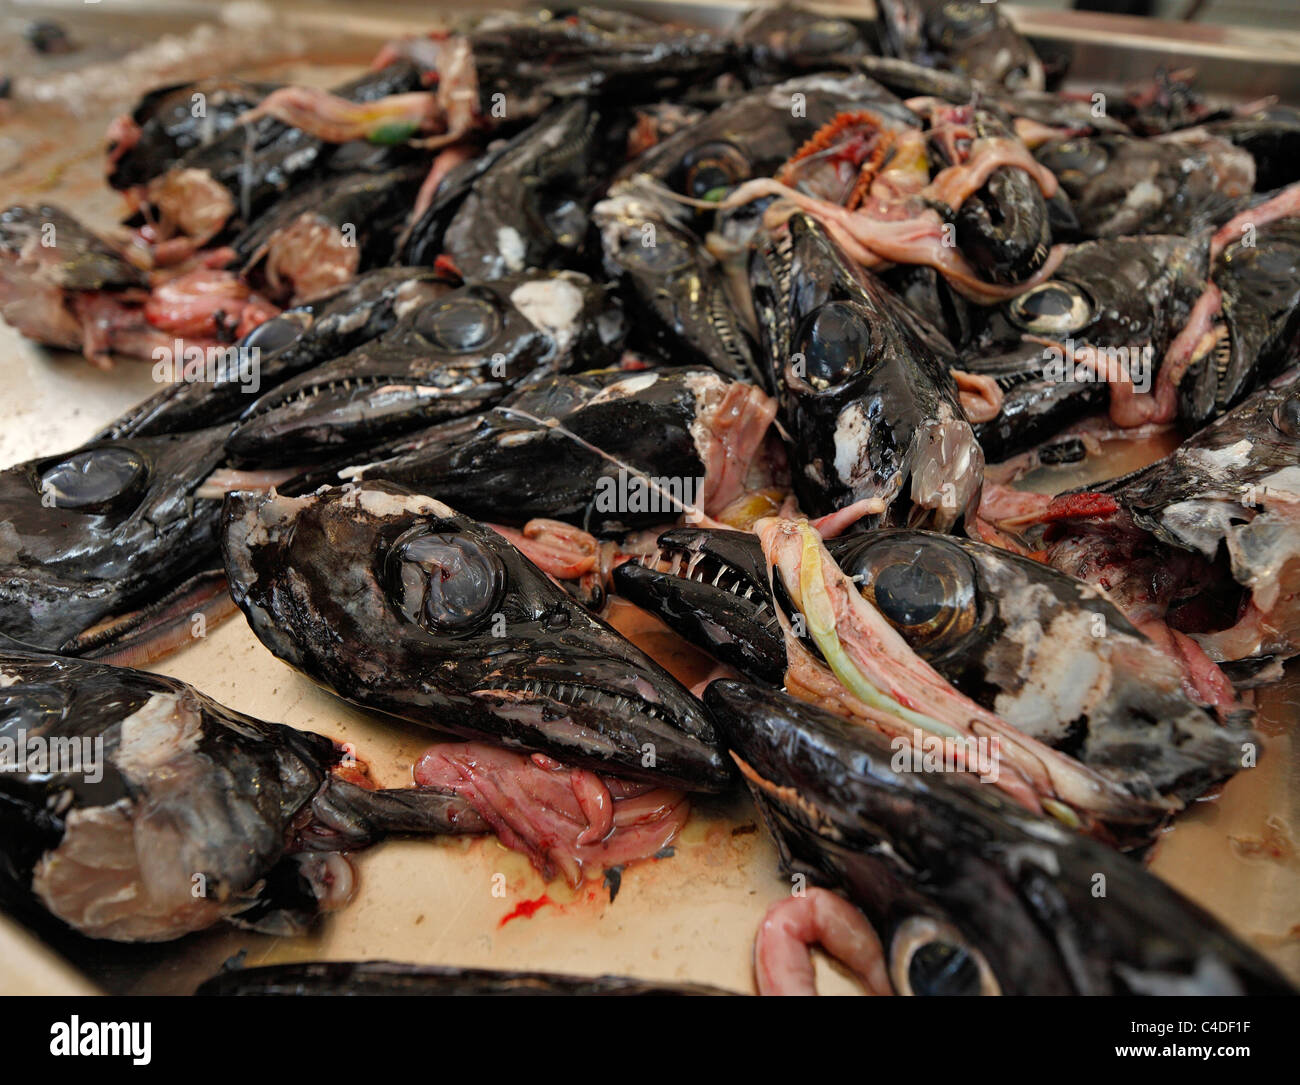 Pile of scabbard fish heads and entrails. Stock Photo